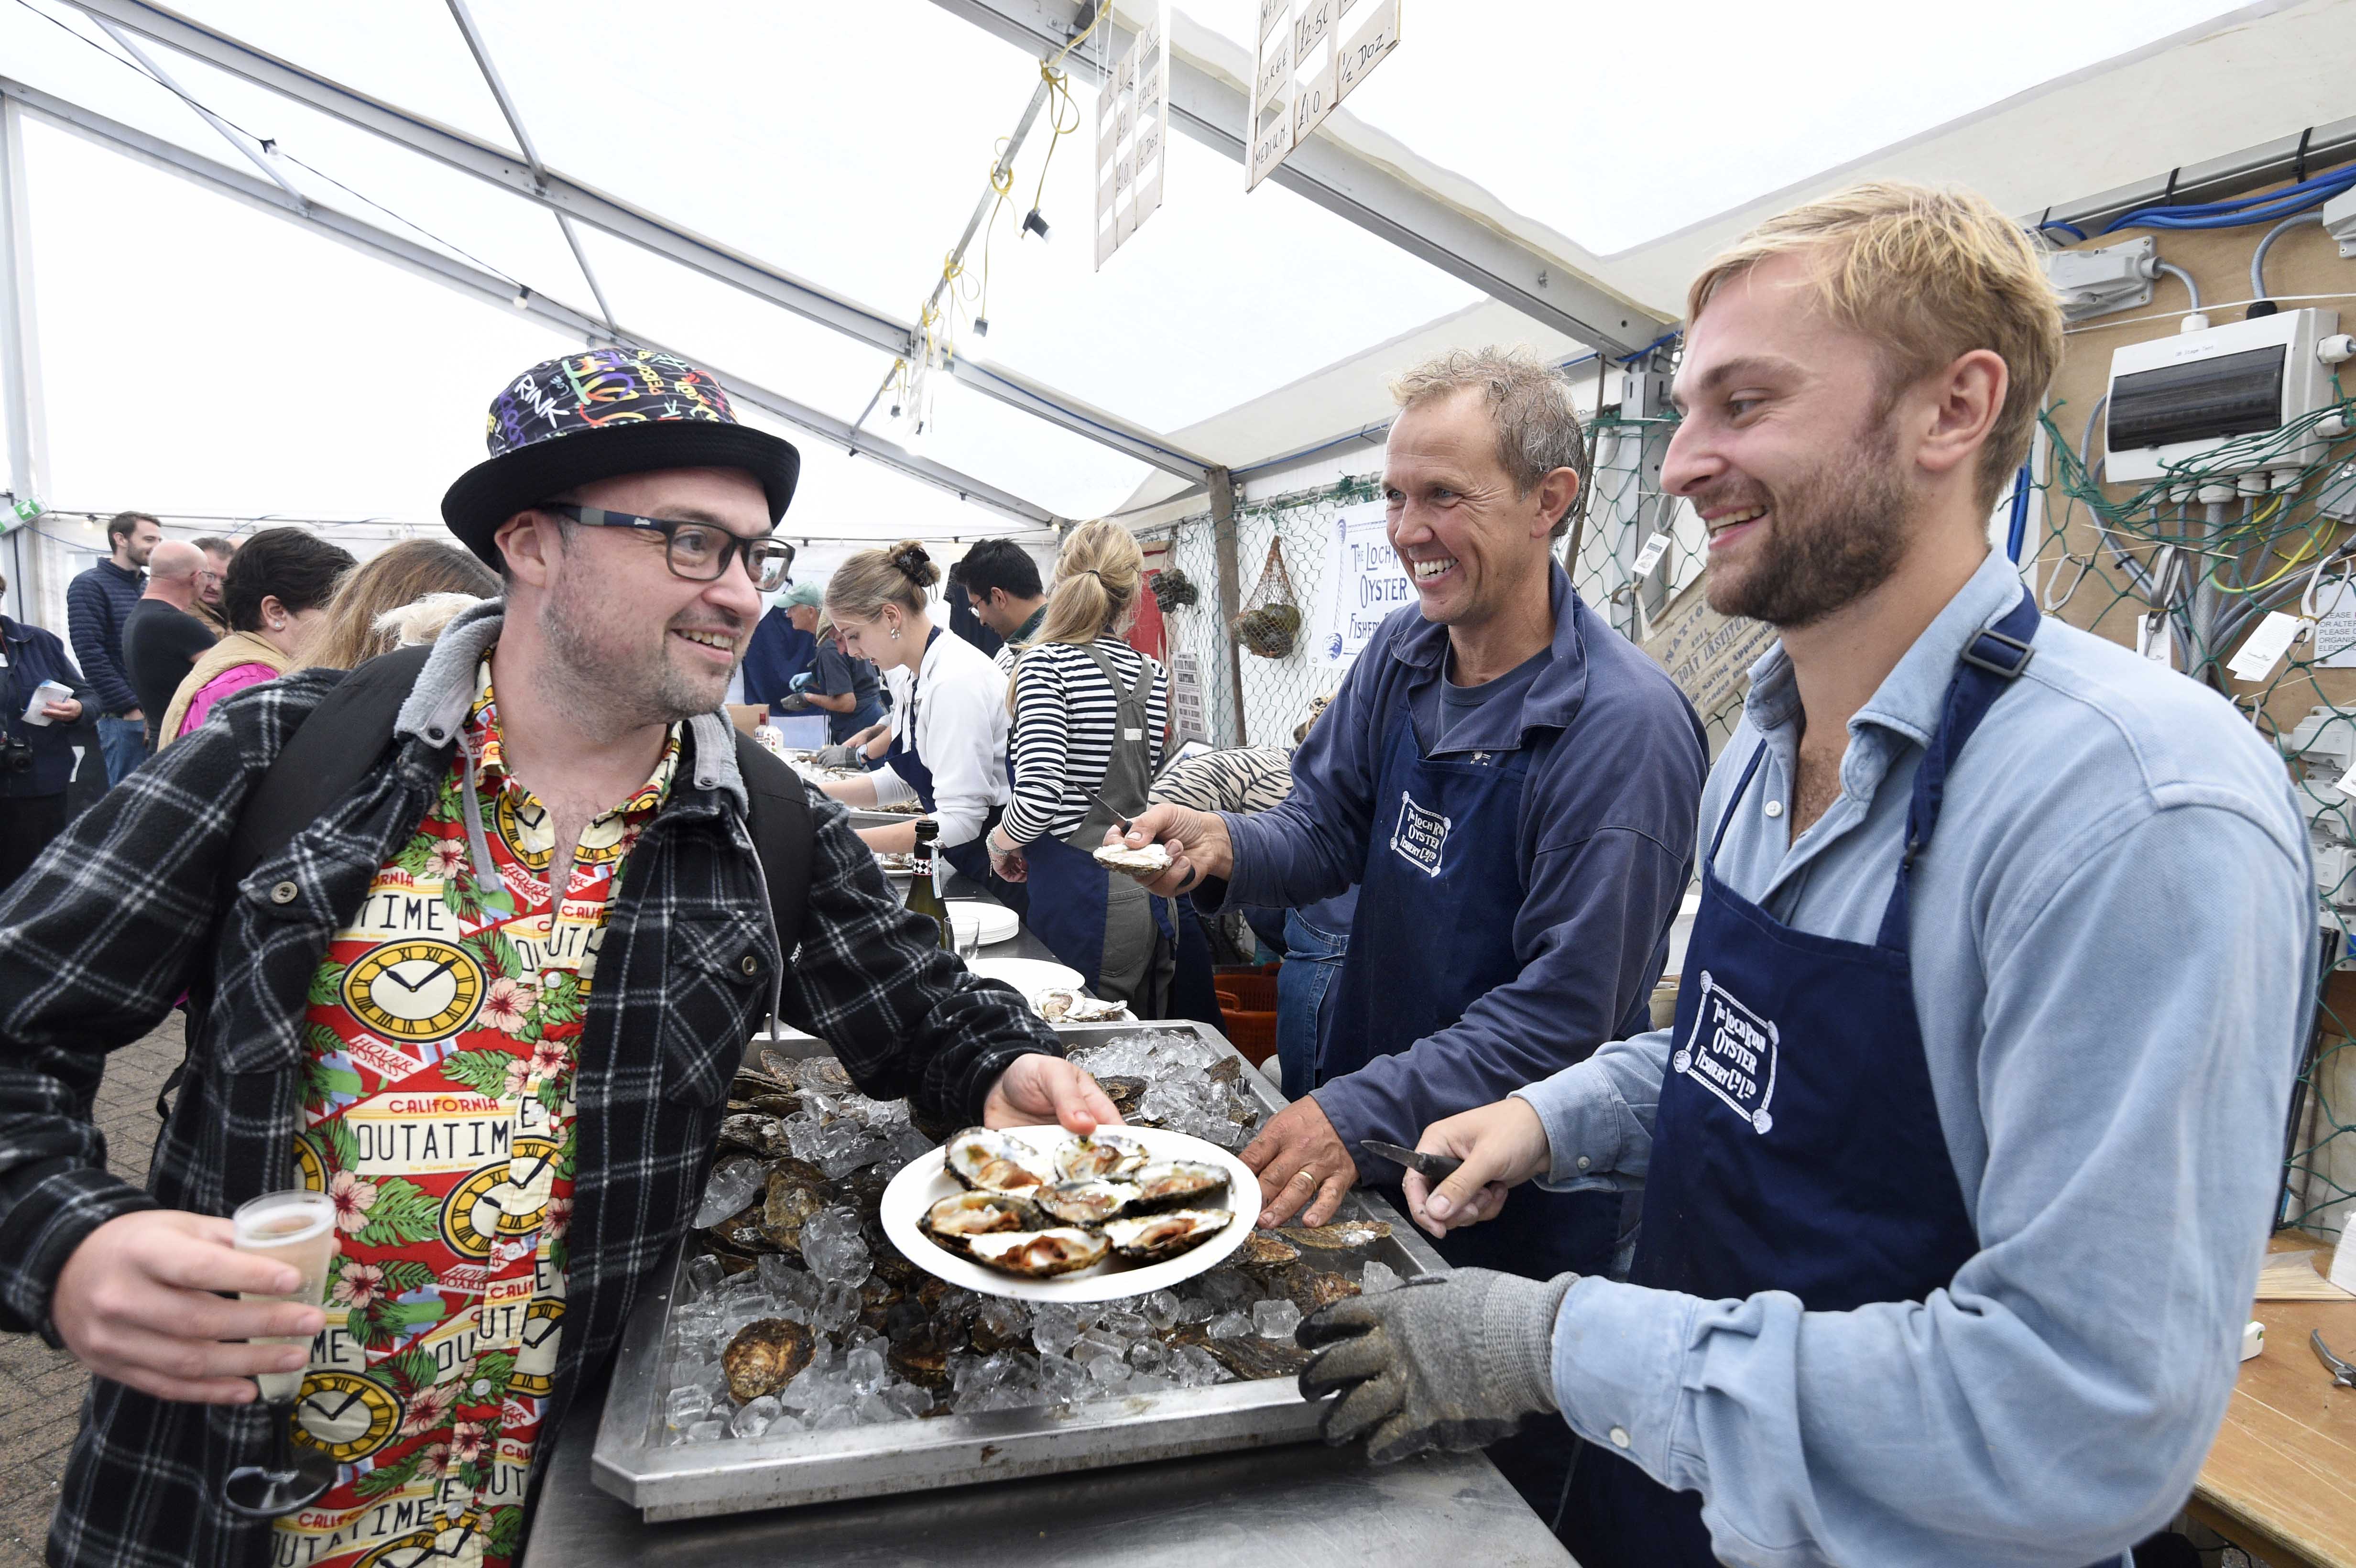 Oyster Bar at 2022 Stranraer Oyster Festival - customer receiving plate of oysters from festival staff